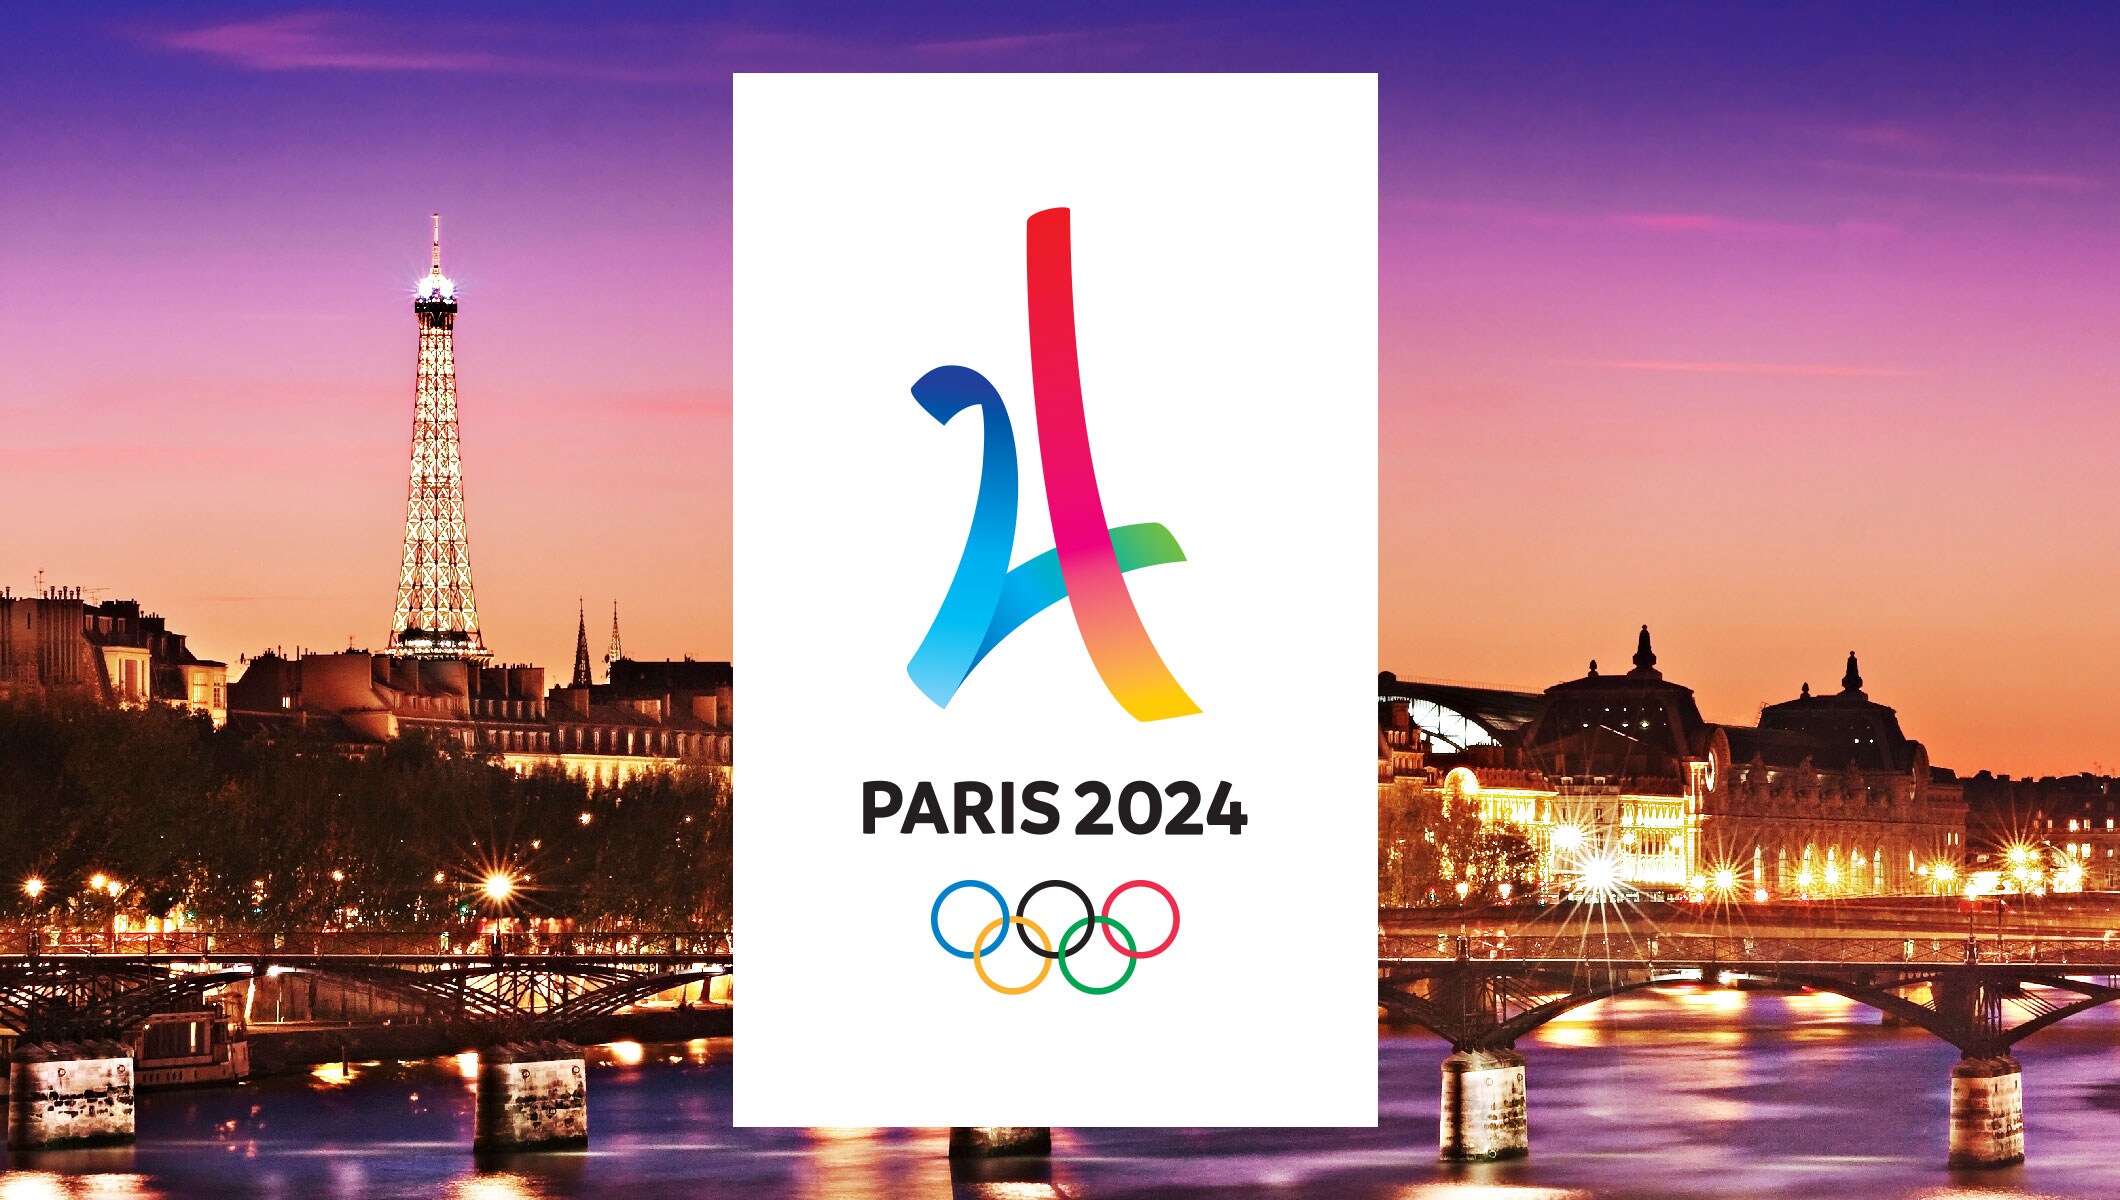 Paris 2024 puts forward its proposal for new sports - Olympic News